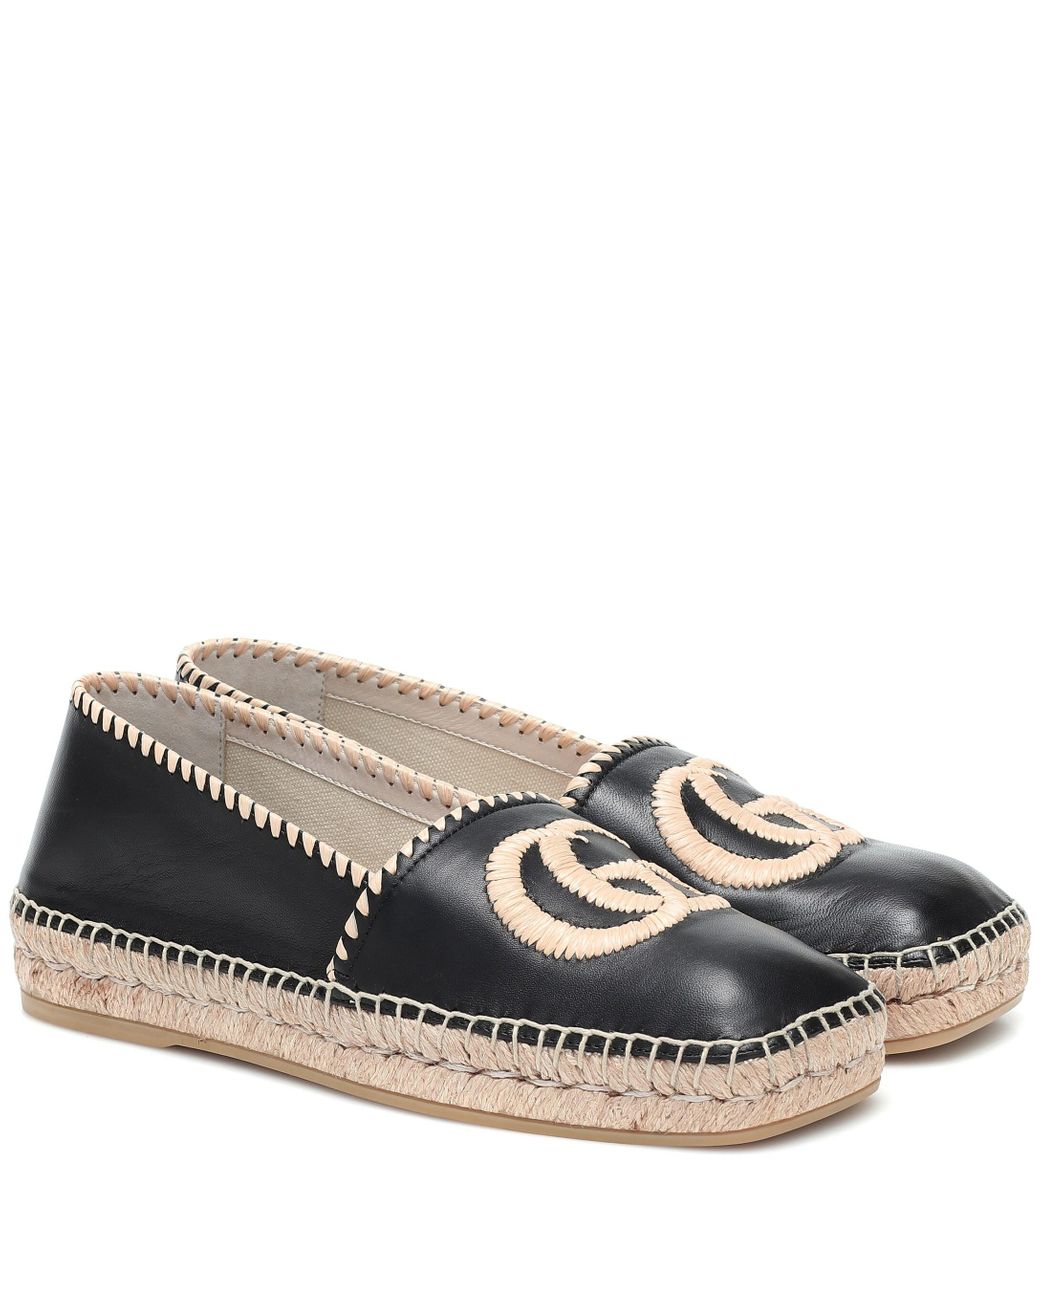 Gucci GG Leather Espadrilles in Black - Lyst